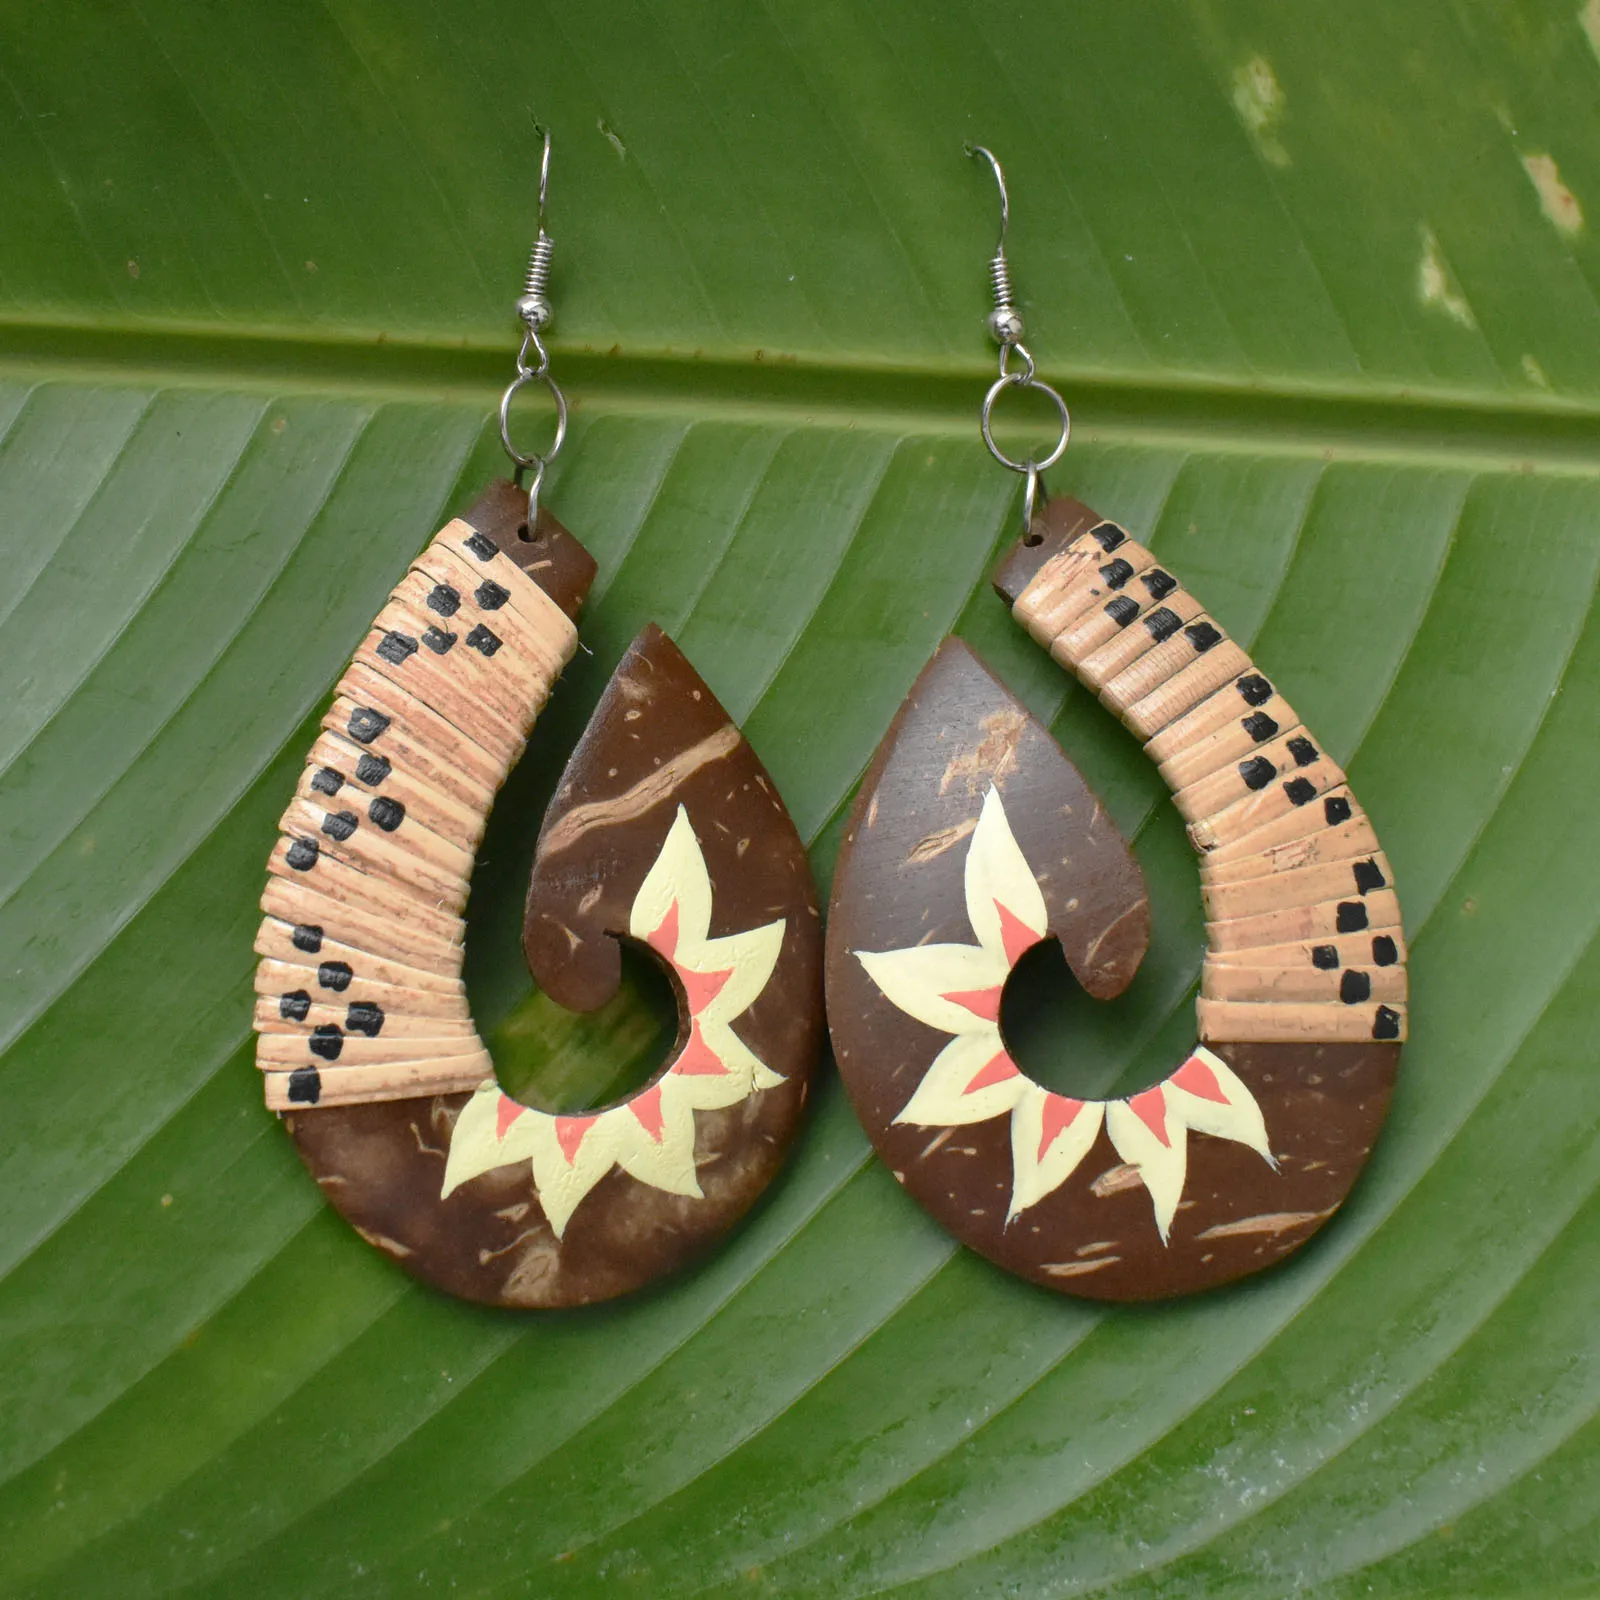 Coconut shell earrings are weird funny funky quirky Hawaiian mismatched  earrings - Shop FRUIT STORIES Earrings & Clip-ons - Pinkoi